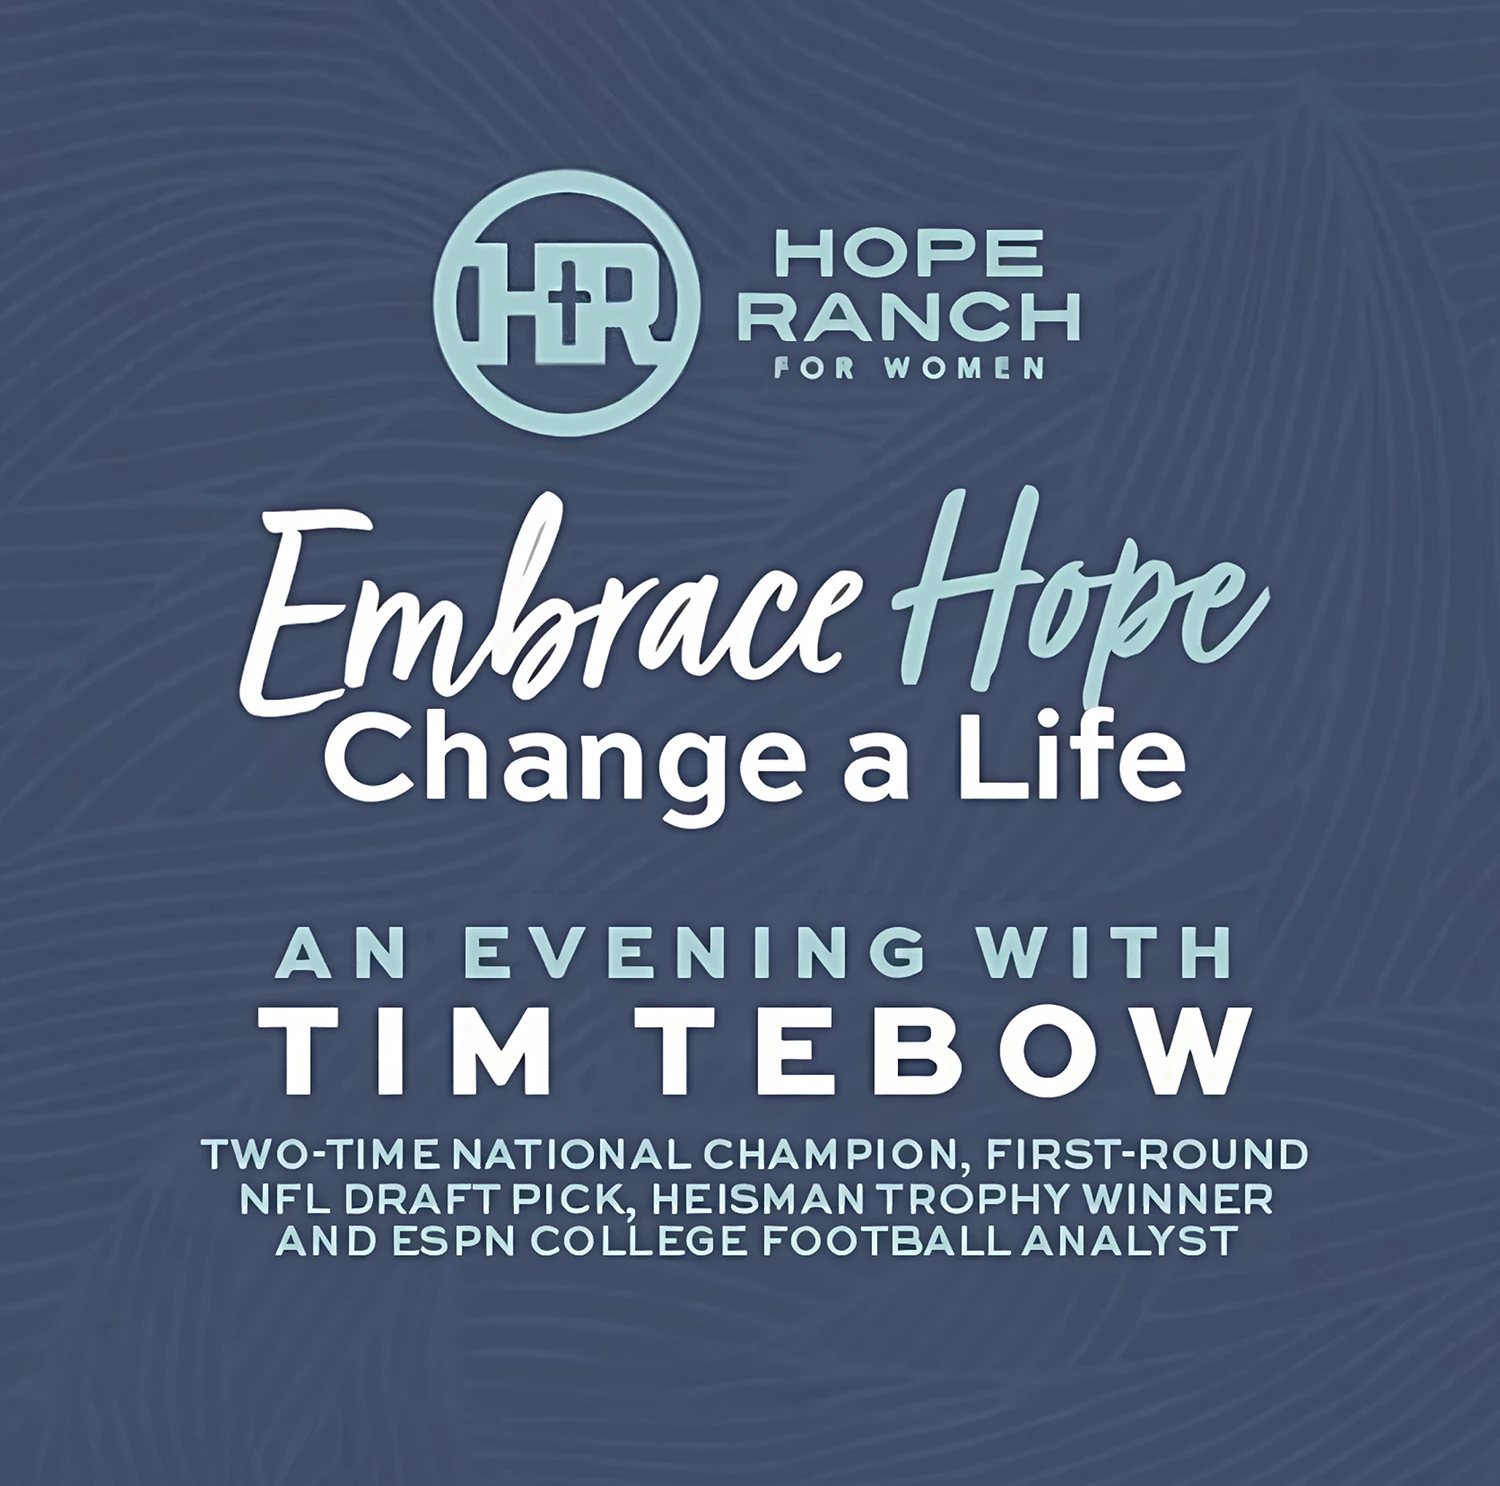 Embrace Hope, Change a Life: An Evening with Tim Tebow, two-time national champion, first-round NFL draft pick, Heisman Trophy winner, and ESPN college football analyst